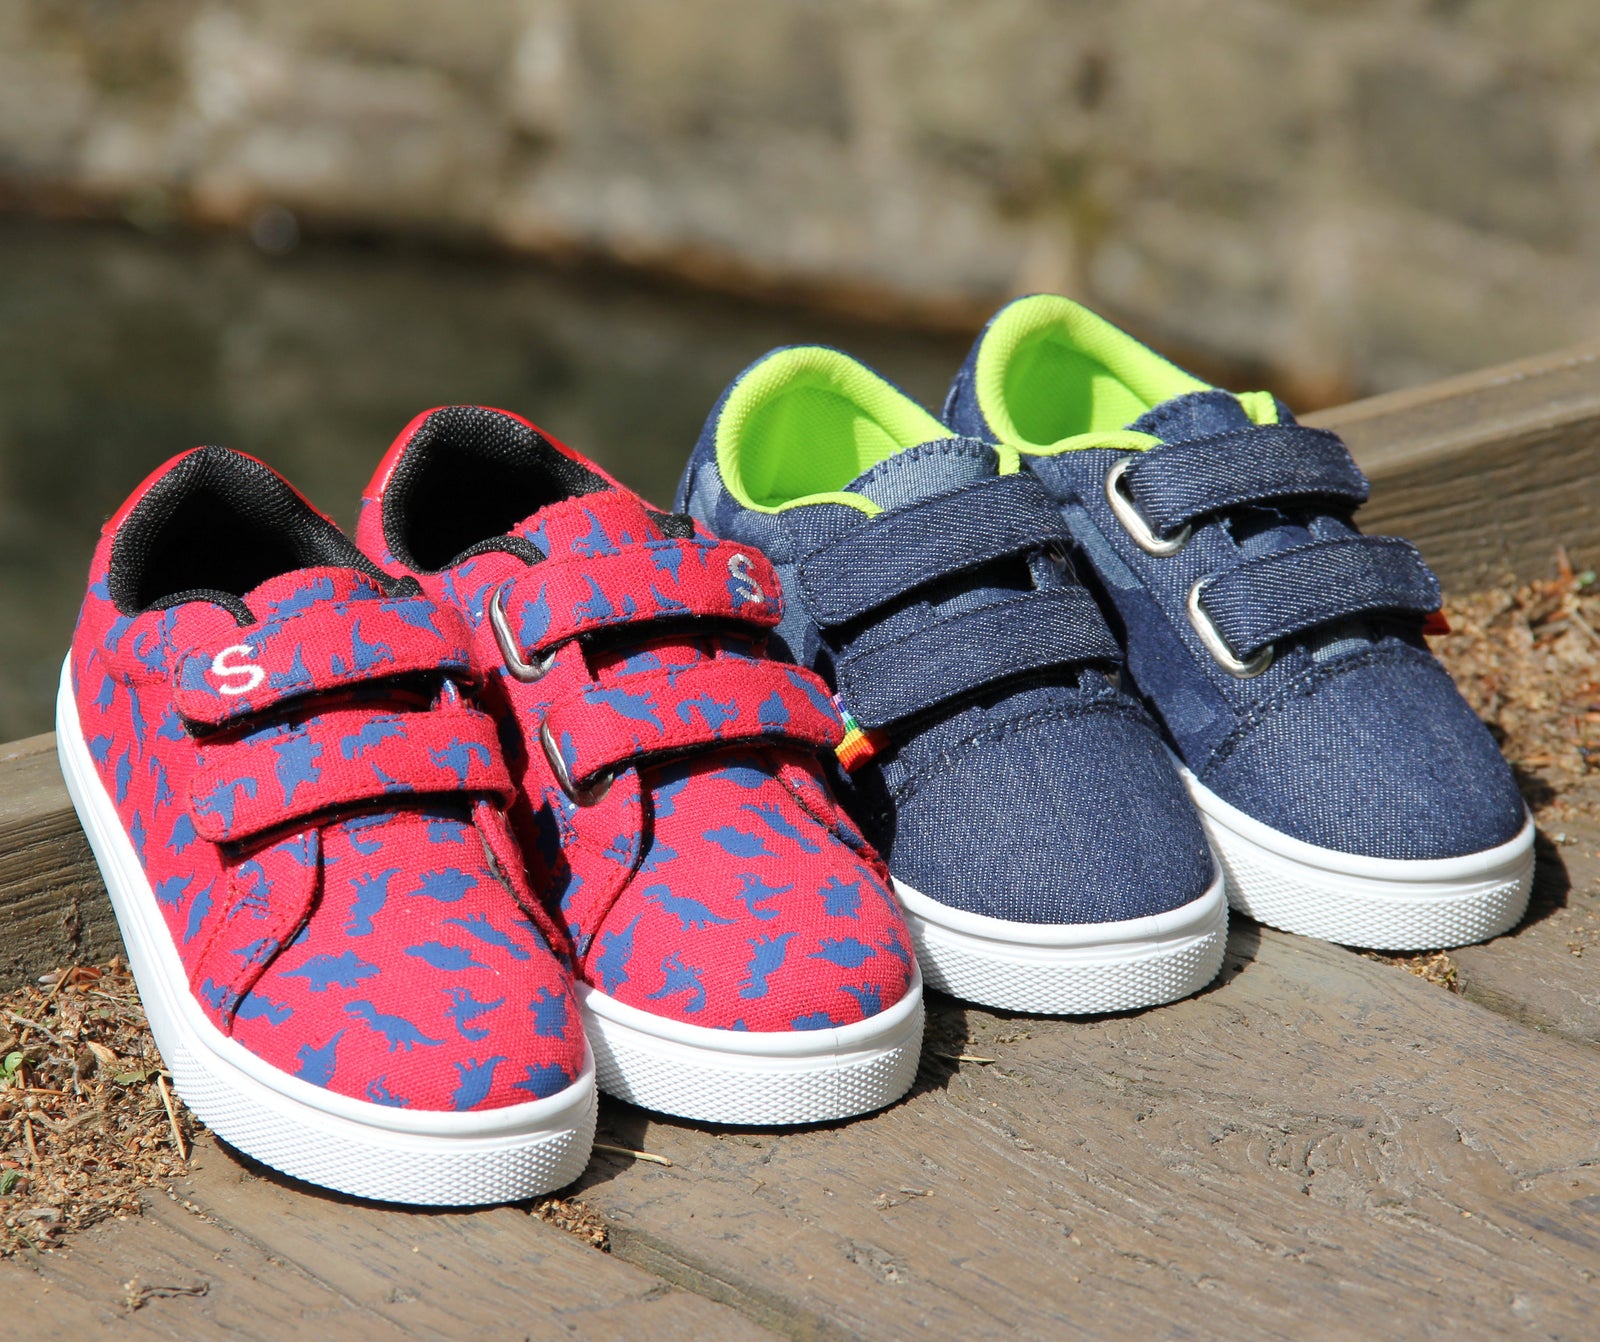 Boys Skyrocket summer canvas shoes in red and blue